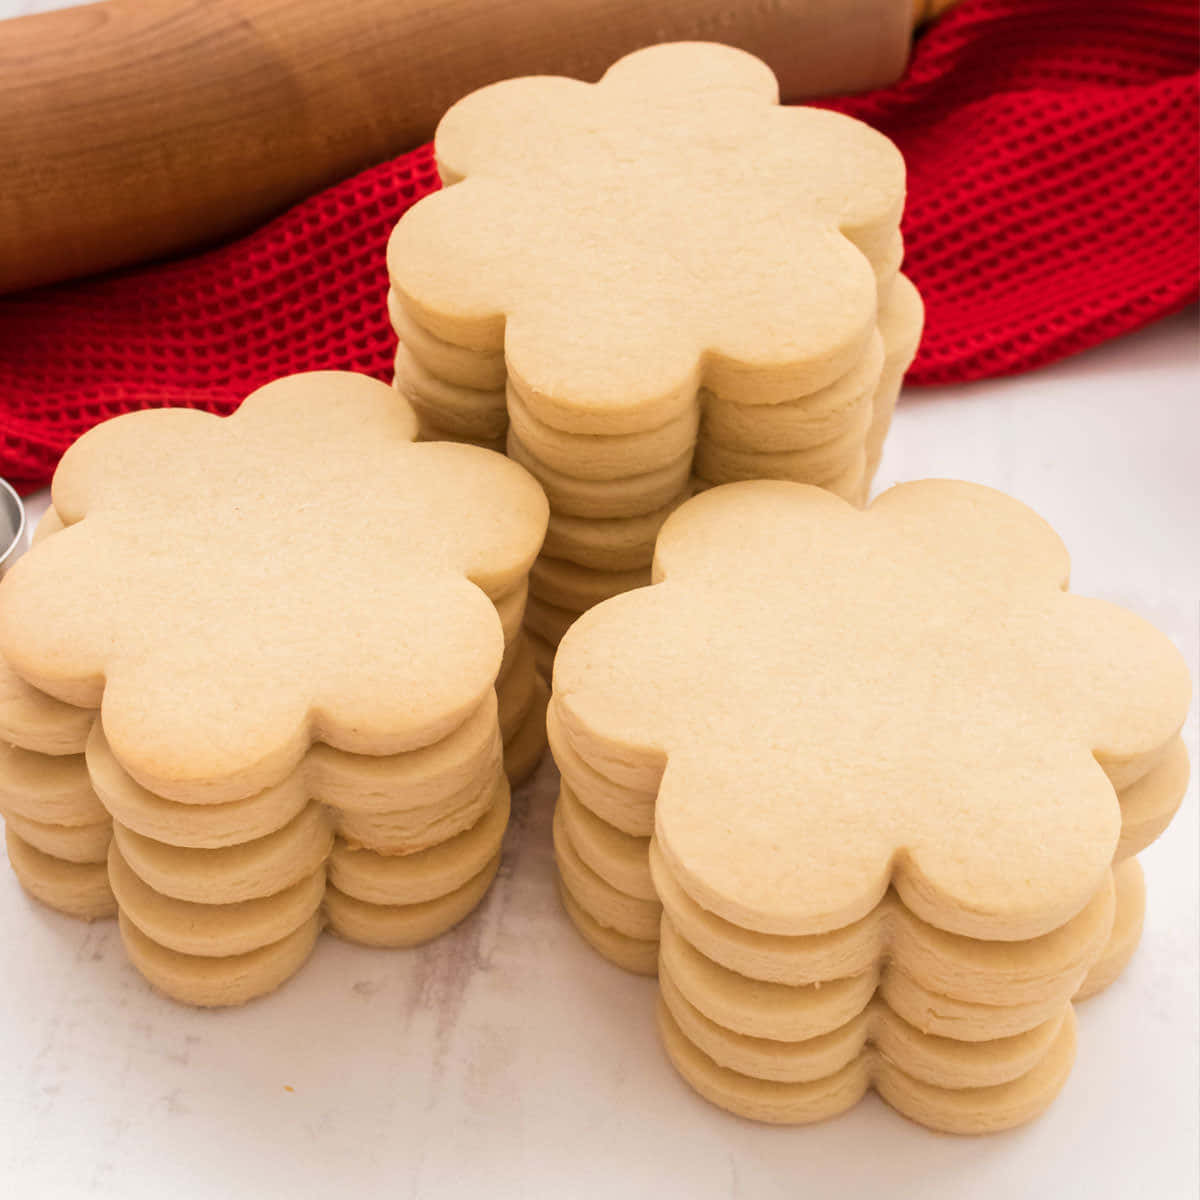 A Stack Of Sugar Cookies On A Table